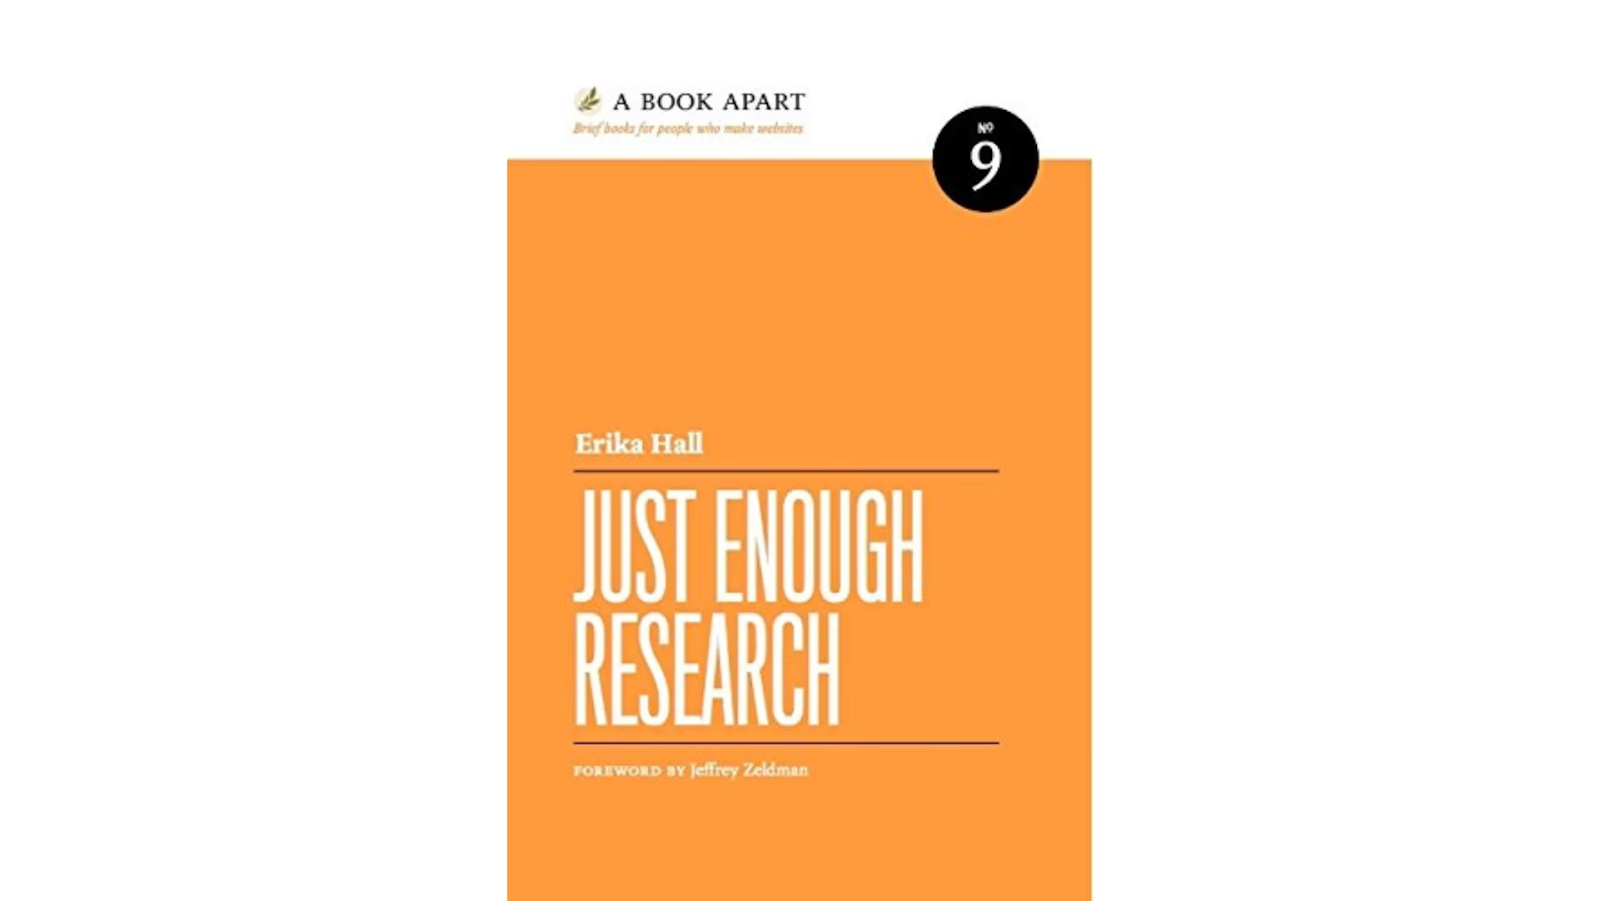 "Just Enough Research" by Erika Hall